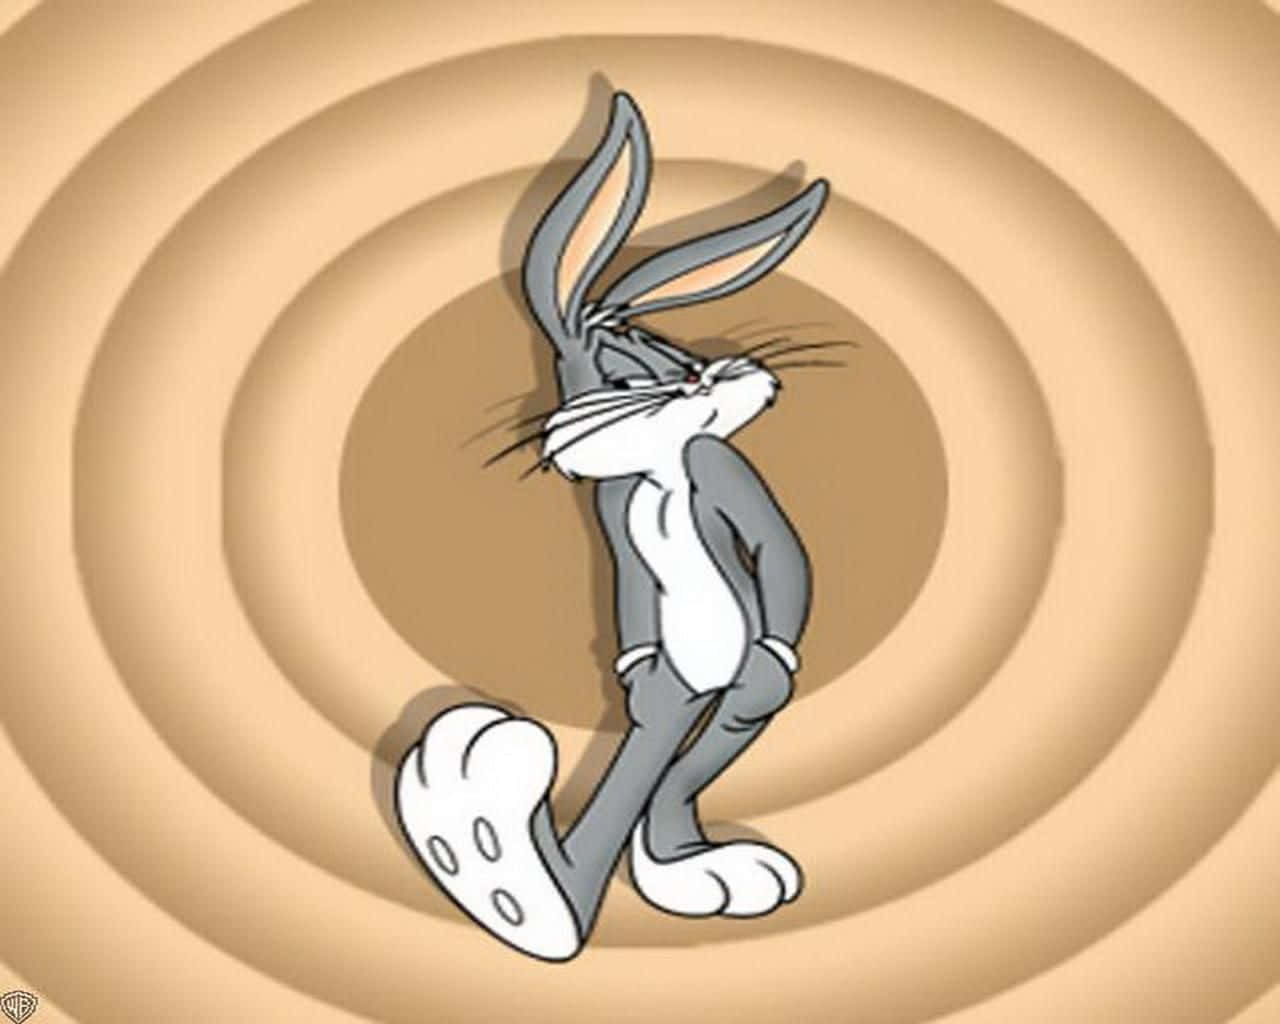 Rabbitreimagined: Cool Bugs Bunny Translates To 